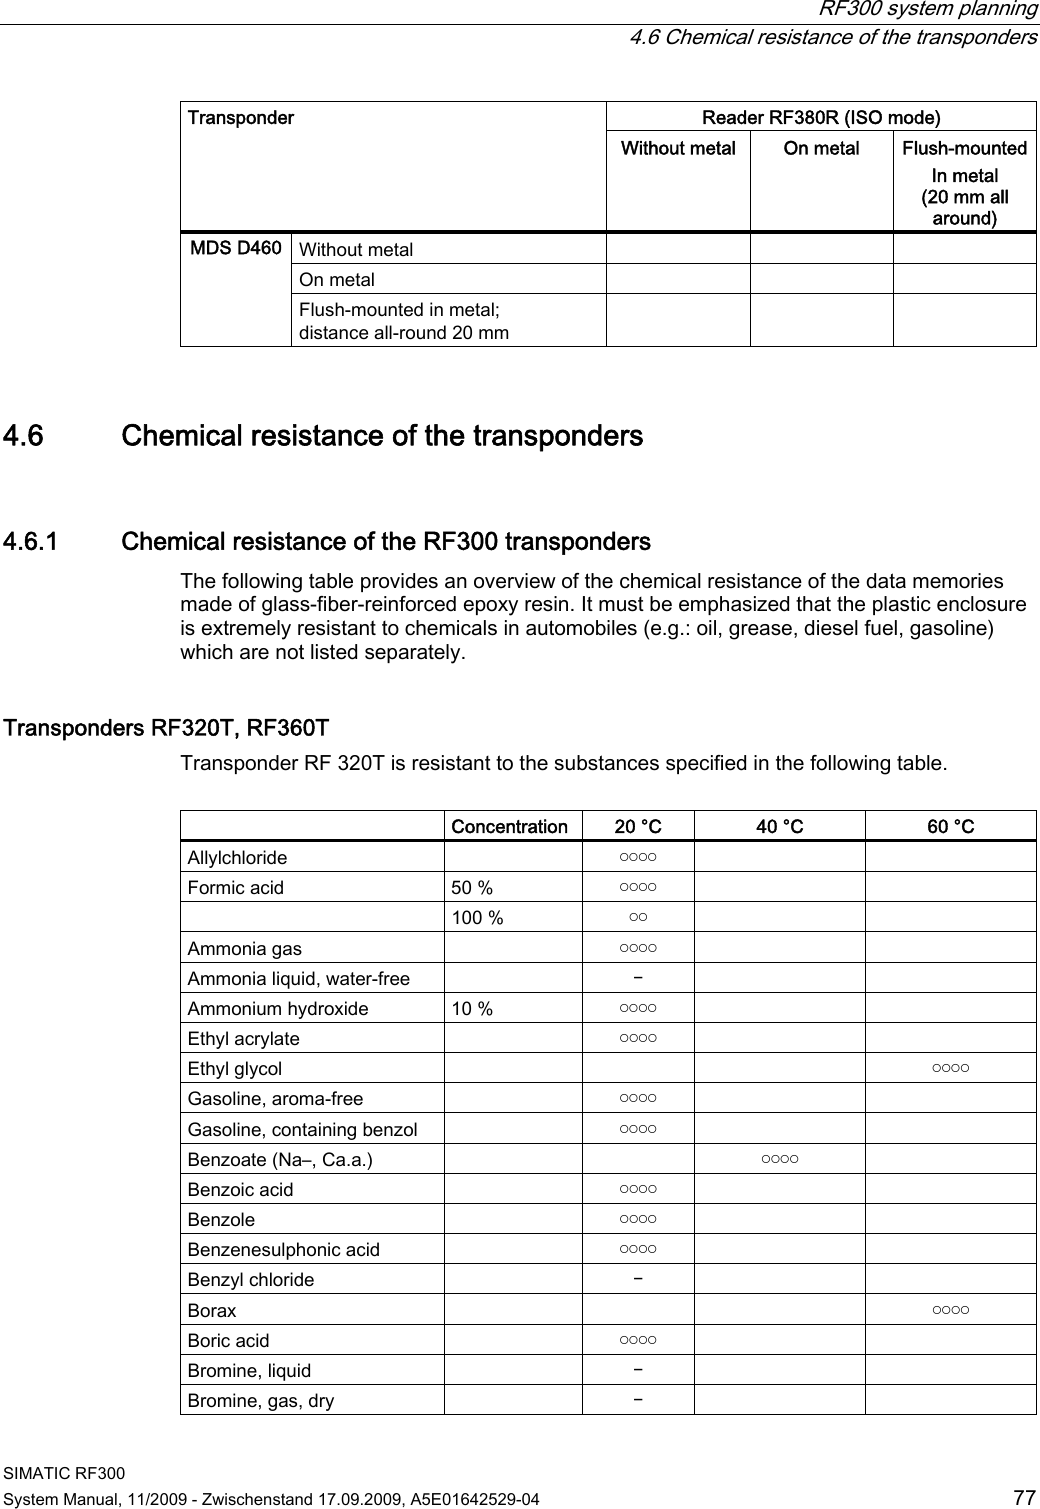  RF300 system planning   4.6 Chemical resistance of the transponders SIMATIC RF300 System Manual, 11/2009 - Zwischenstand 17.09.2009, A5E01642529-04  77 Reader RF380R (ISO mode) Transponder  Without metal On metal  Flush-mounted In metal (20 mm all around) Without metal       On metal       MDS D460 Flush-mounted in metal; distance all-round 20 mm    4.6 Chemical resistance of the transponders 4.6.1 Chemical resistance of the RF300 transponders The following table provides an overview of the chemical resistance of the data memories made of glass-fiber-reinforced epoxy resin. It must be emphasized that the plastic enclosure is extremely resistant to chemicals in automobiles (e.g.: oil, grease, diesel fuel, gasoline) which are not listed separately.  Transponders RF320T, RF360T Transponder RF 320T is resistant to the substances specified in the following table.    Concentration  20 °C  40 °C  60 °C Allylchloride    ￮￮￮￮     Formic acid  50 %  ￮￮￮￮       100 %  ￮￮     Ammonia gas    ￮￮￮￮     Ammonia liquid, water-free    ￚ     Ammonium hydroxide  10 %  ￮￮￮￮     Ethyl acrylate    ￮￮￮￮     Ethyl glycol        ￮￮￮￮ Gasoline, aroma-free    ￮￮￮￮     Gasoline, containing benzol    ￮￮￮￮     Benzoate (Na–, Ca.a.)      ￮￮￮￮   Benzoic acid    ￮￮￮￮     Benzole    ￮￮￮￮     Benzenesulphonic acid    ￮￮￮￮     Benzyl chloride    ￚ     Borax        ￮￮￮￮ Boric acid    ￮￮￮￮     Bromine, liquid    ￚ     Bromine, gas, dry    ￚ     